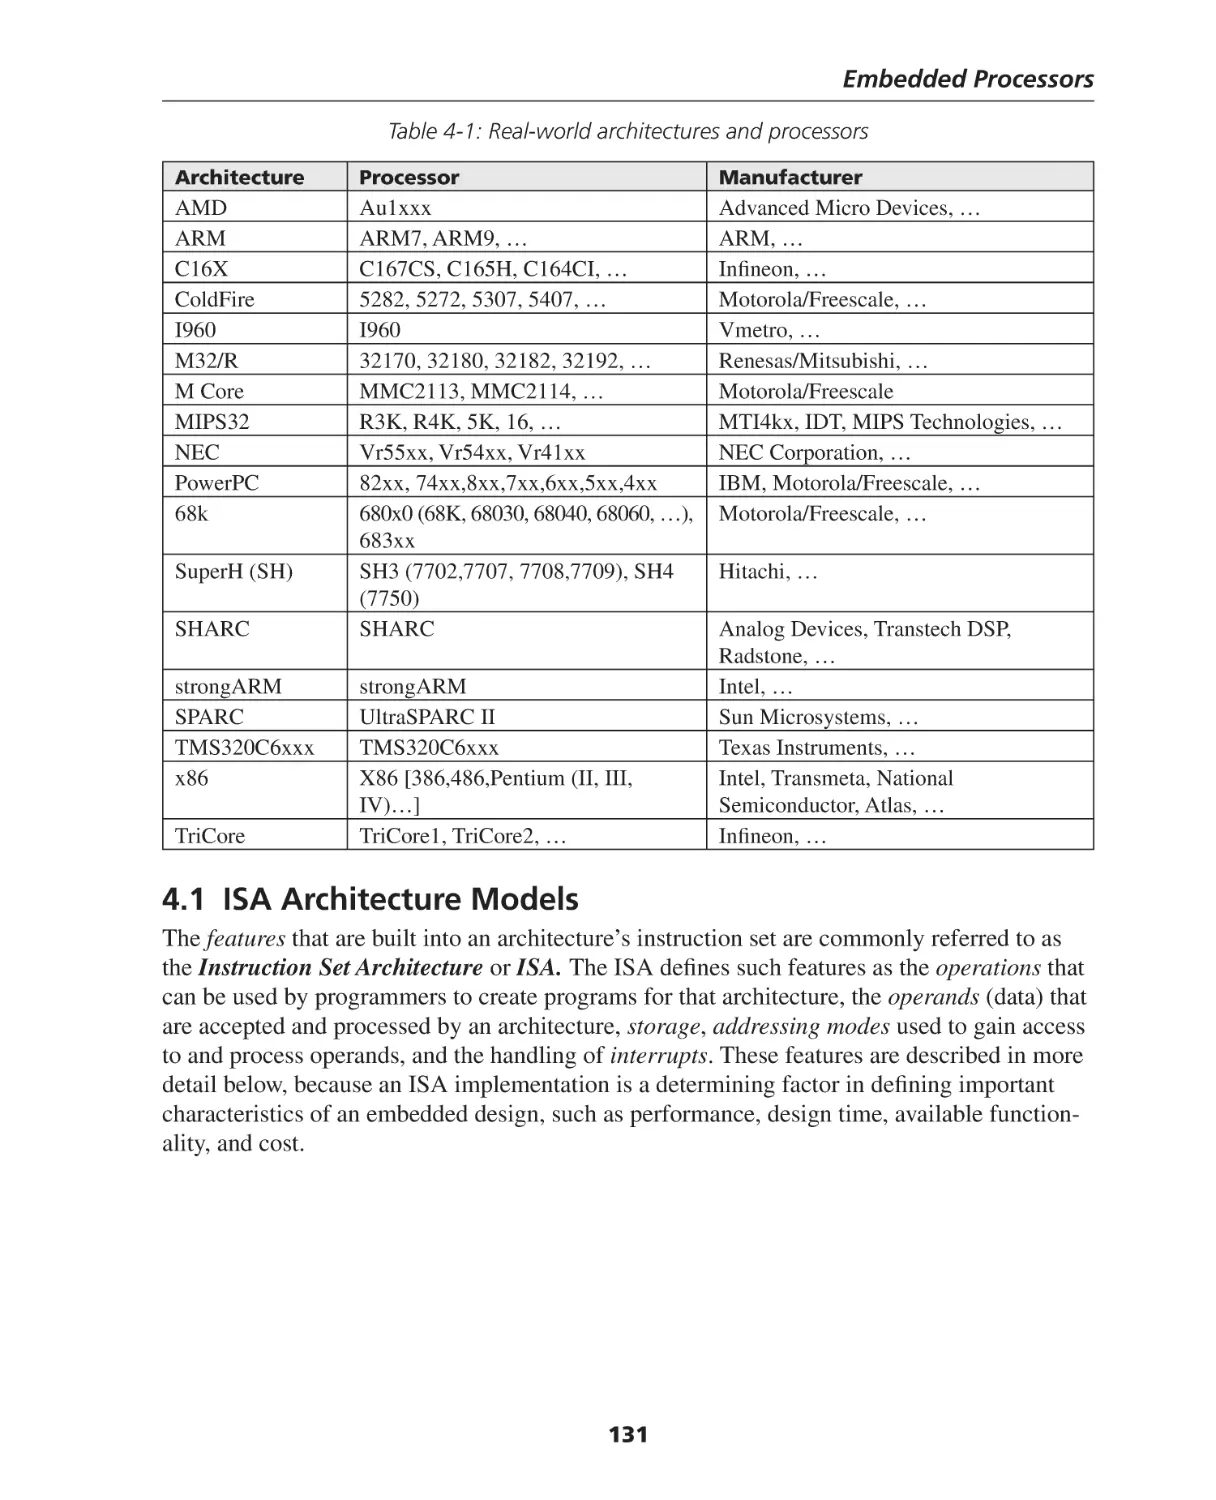 4.1 ISA Architecture Models